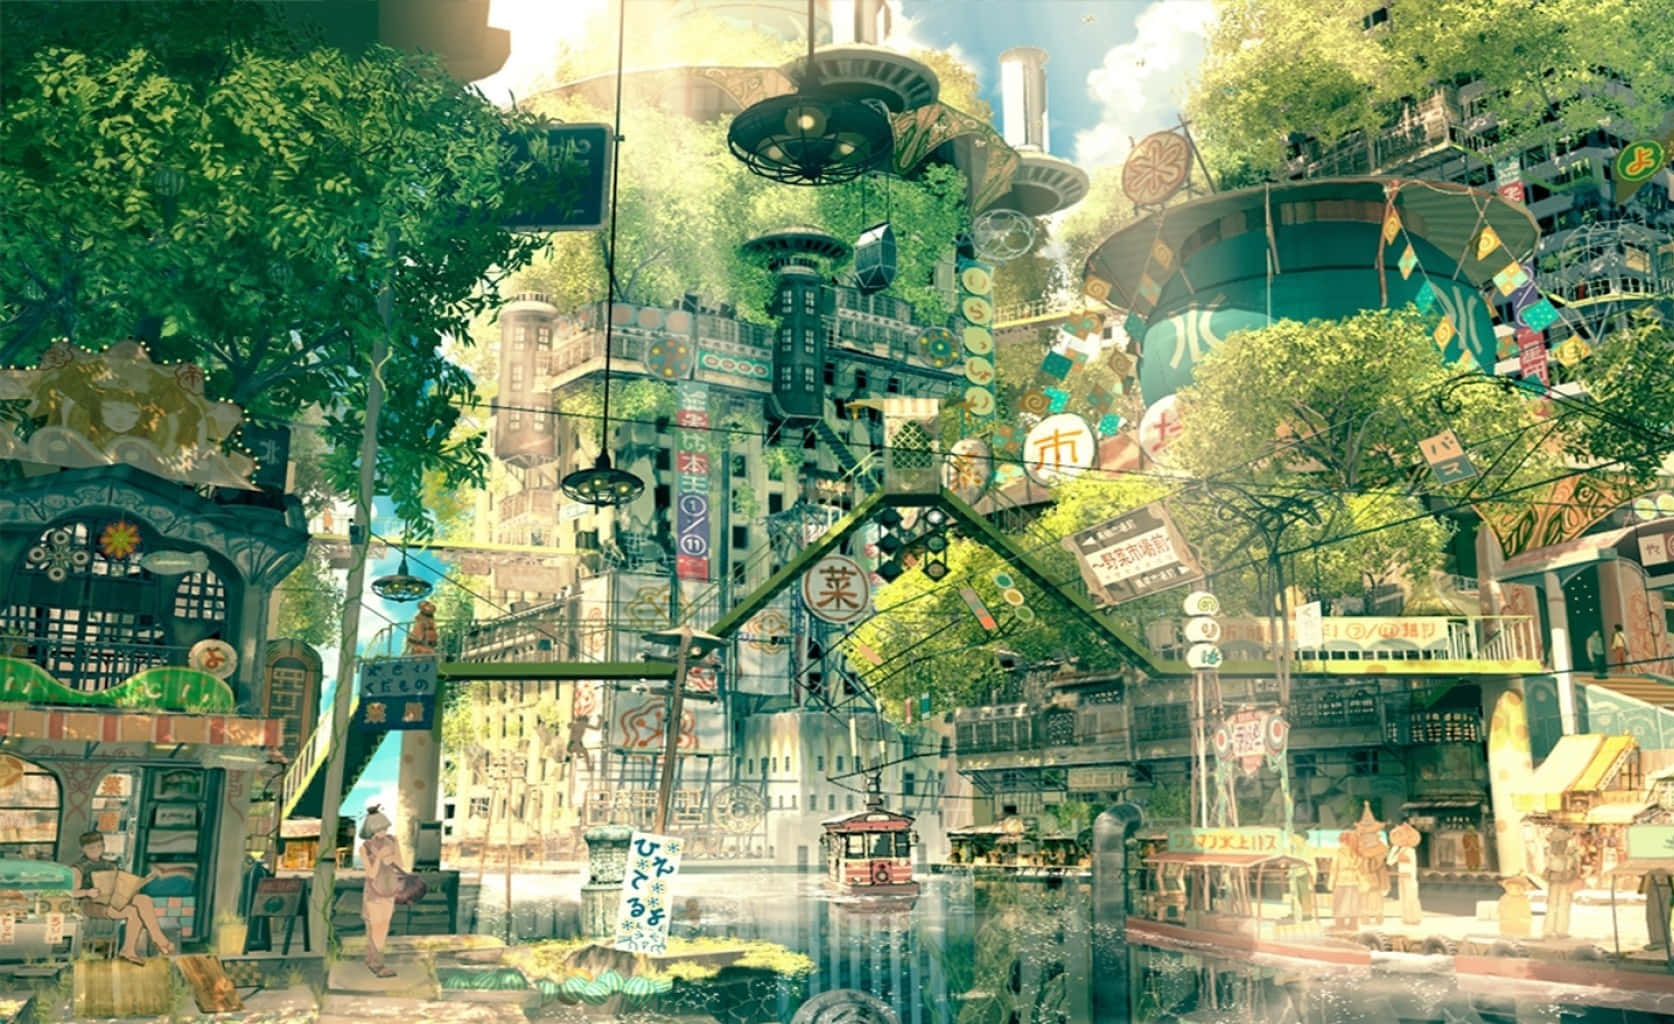 Free Anime City Wallpaper Downloads, [300+] Anime City Wallpapers for FREE  